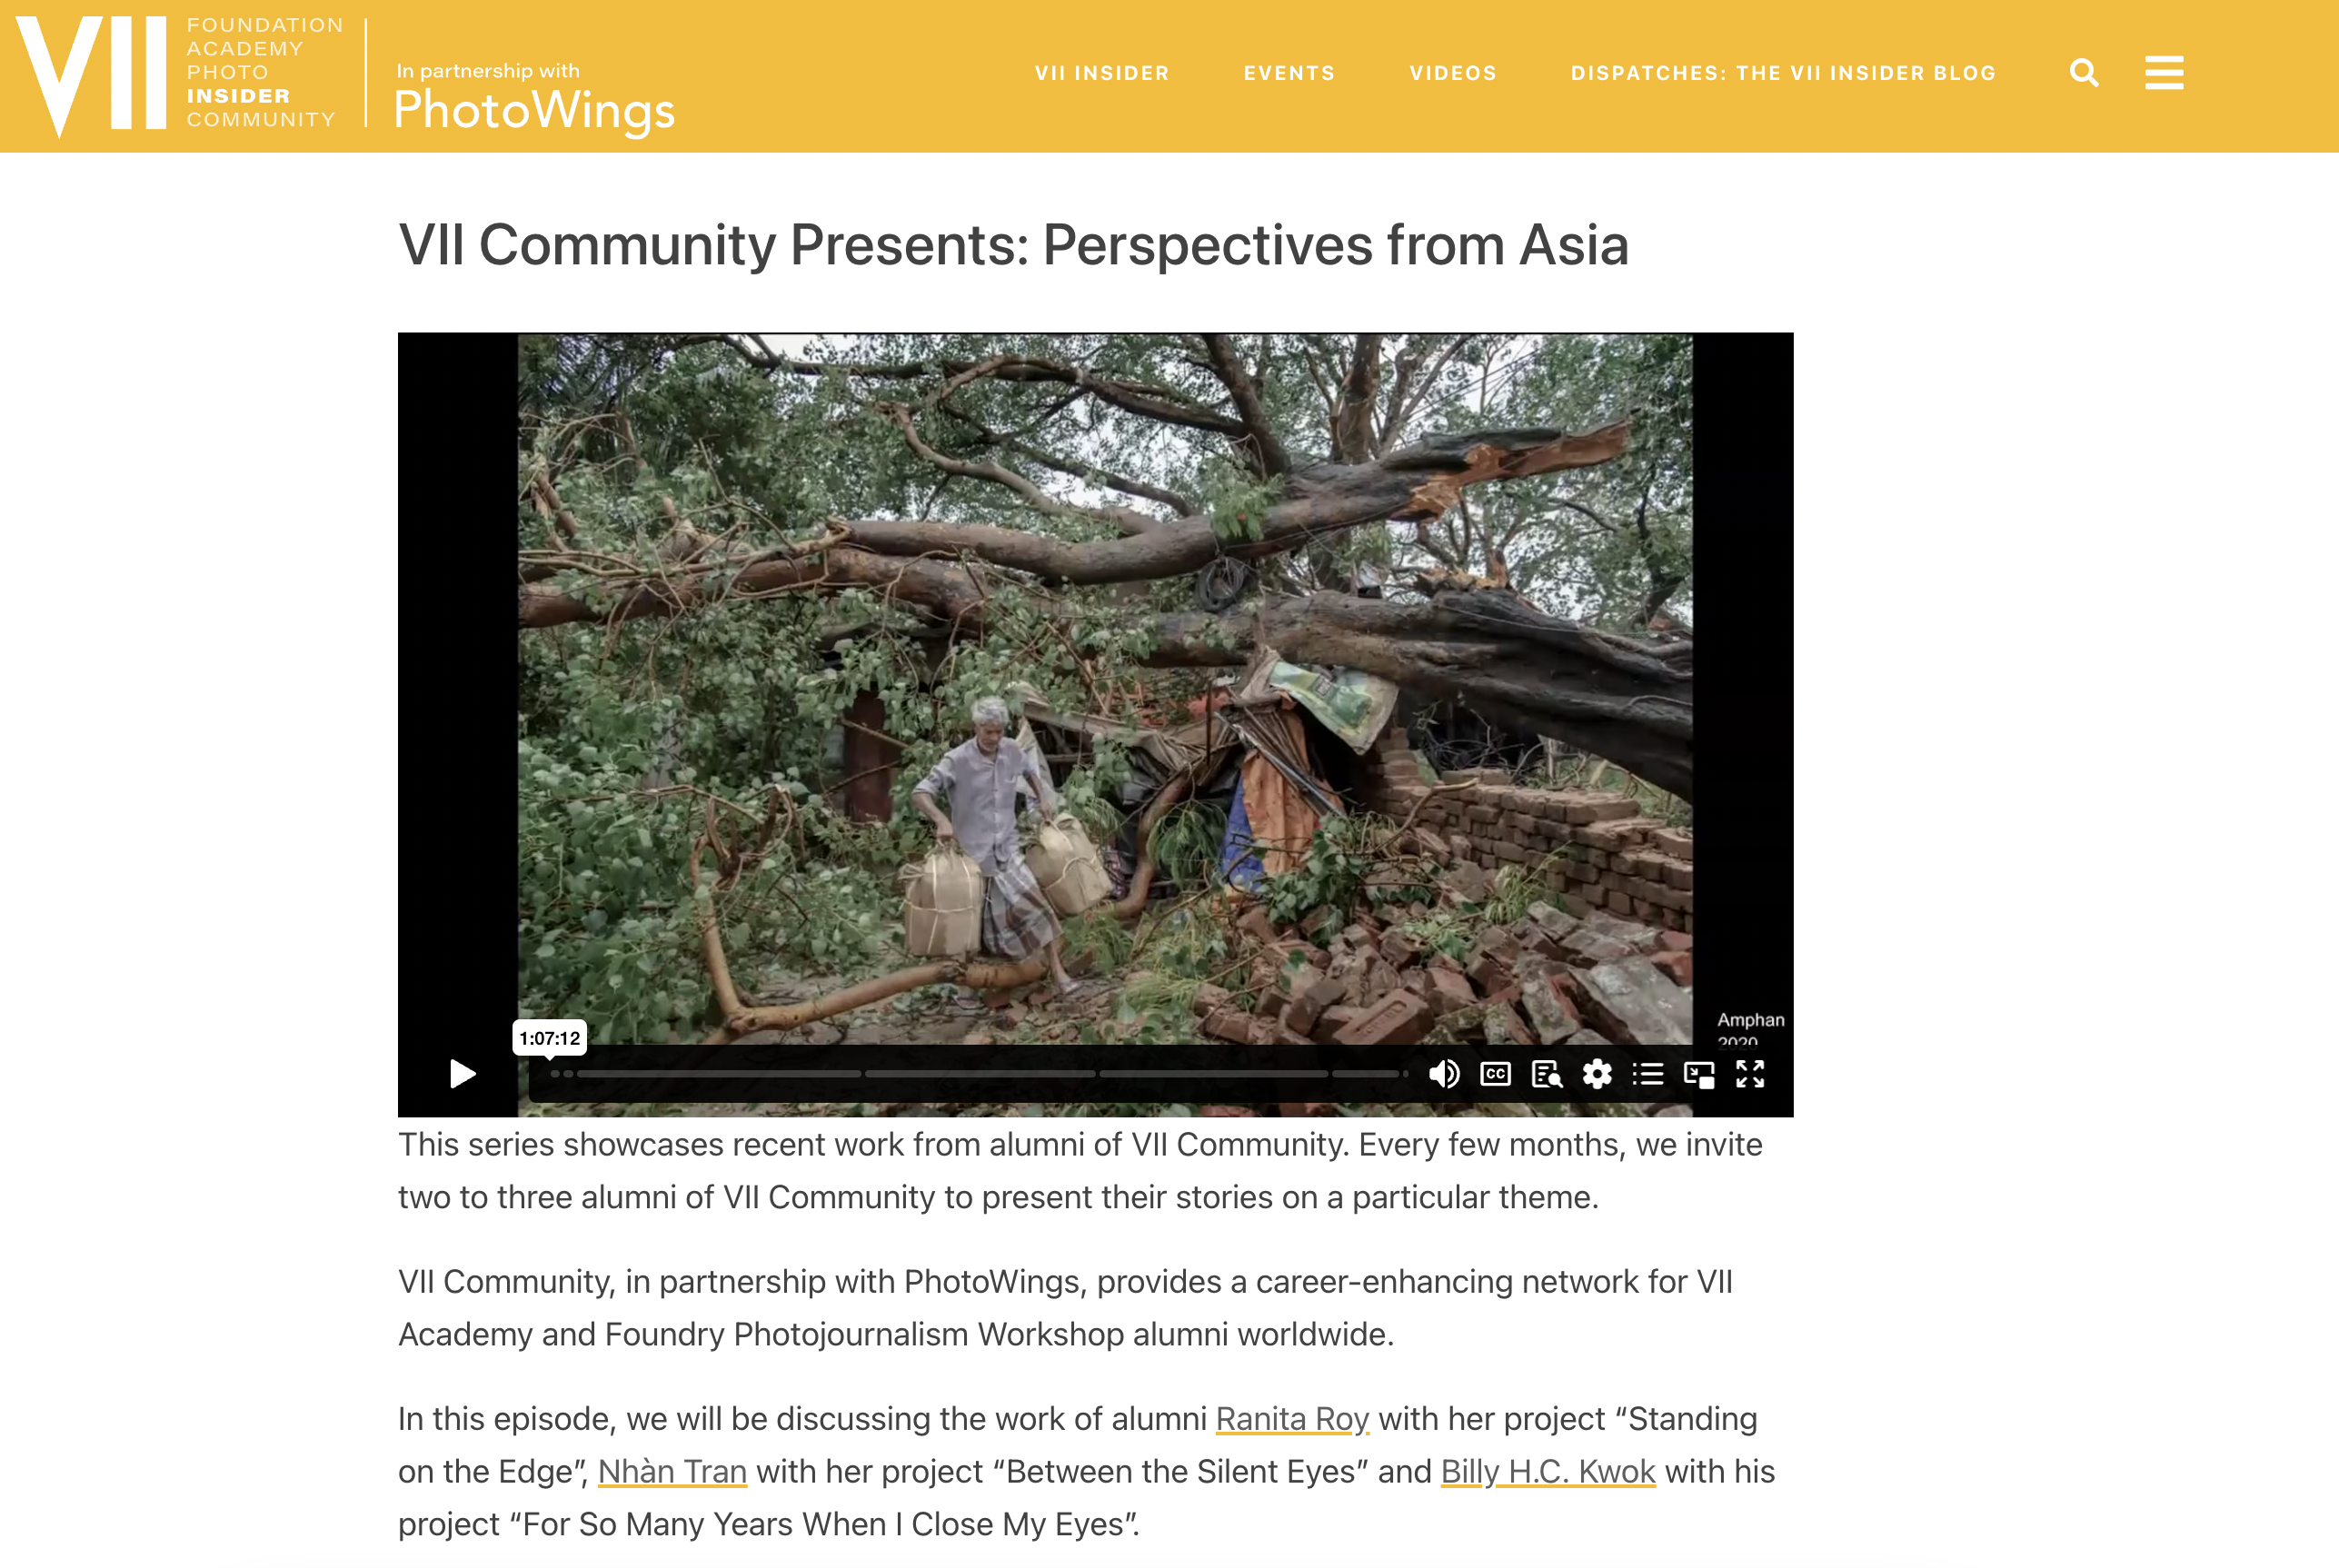 VII Community Presents: Perspectives from Asia - VII Foundation